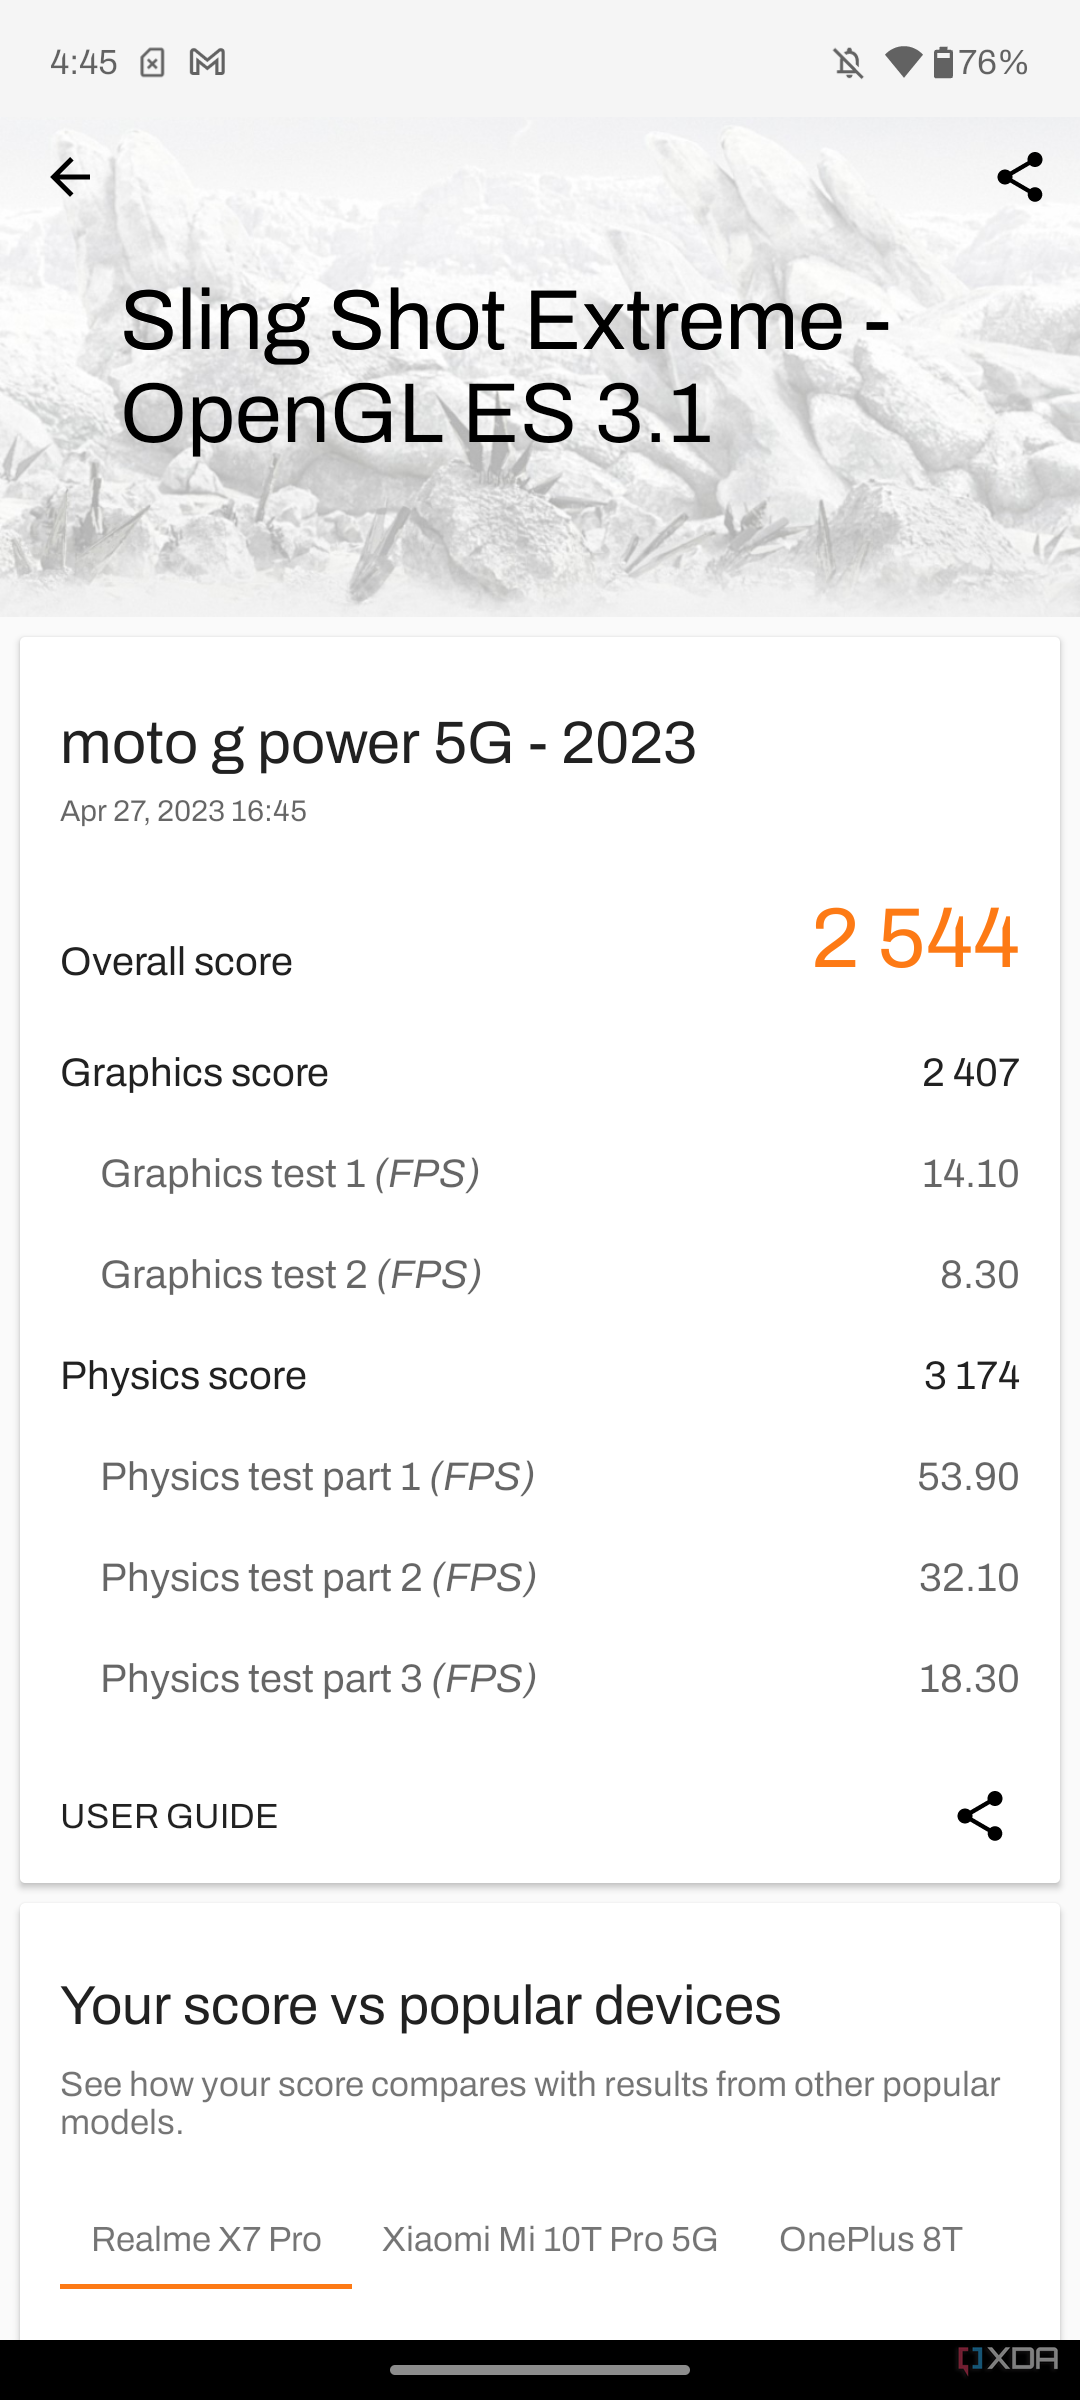 Moto G Power 5G 2023 3DMark results from Sling Shot Extreme test